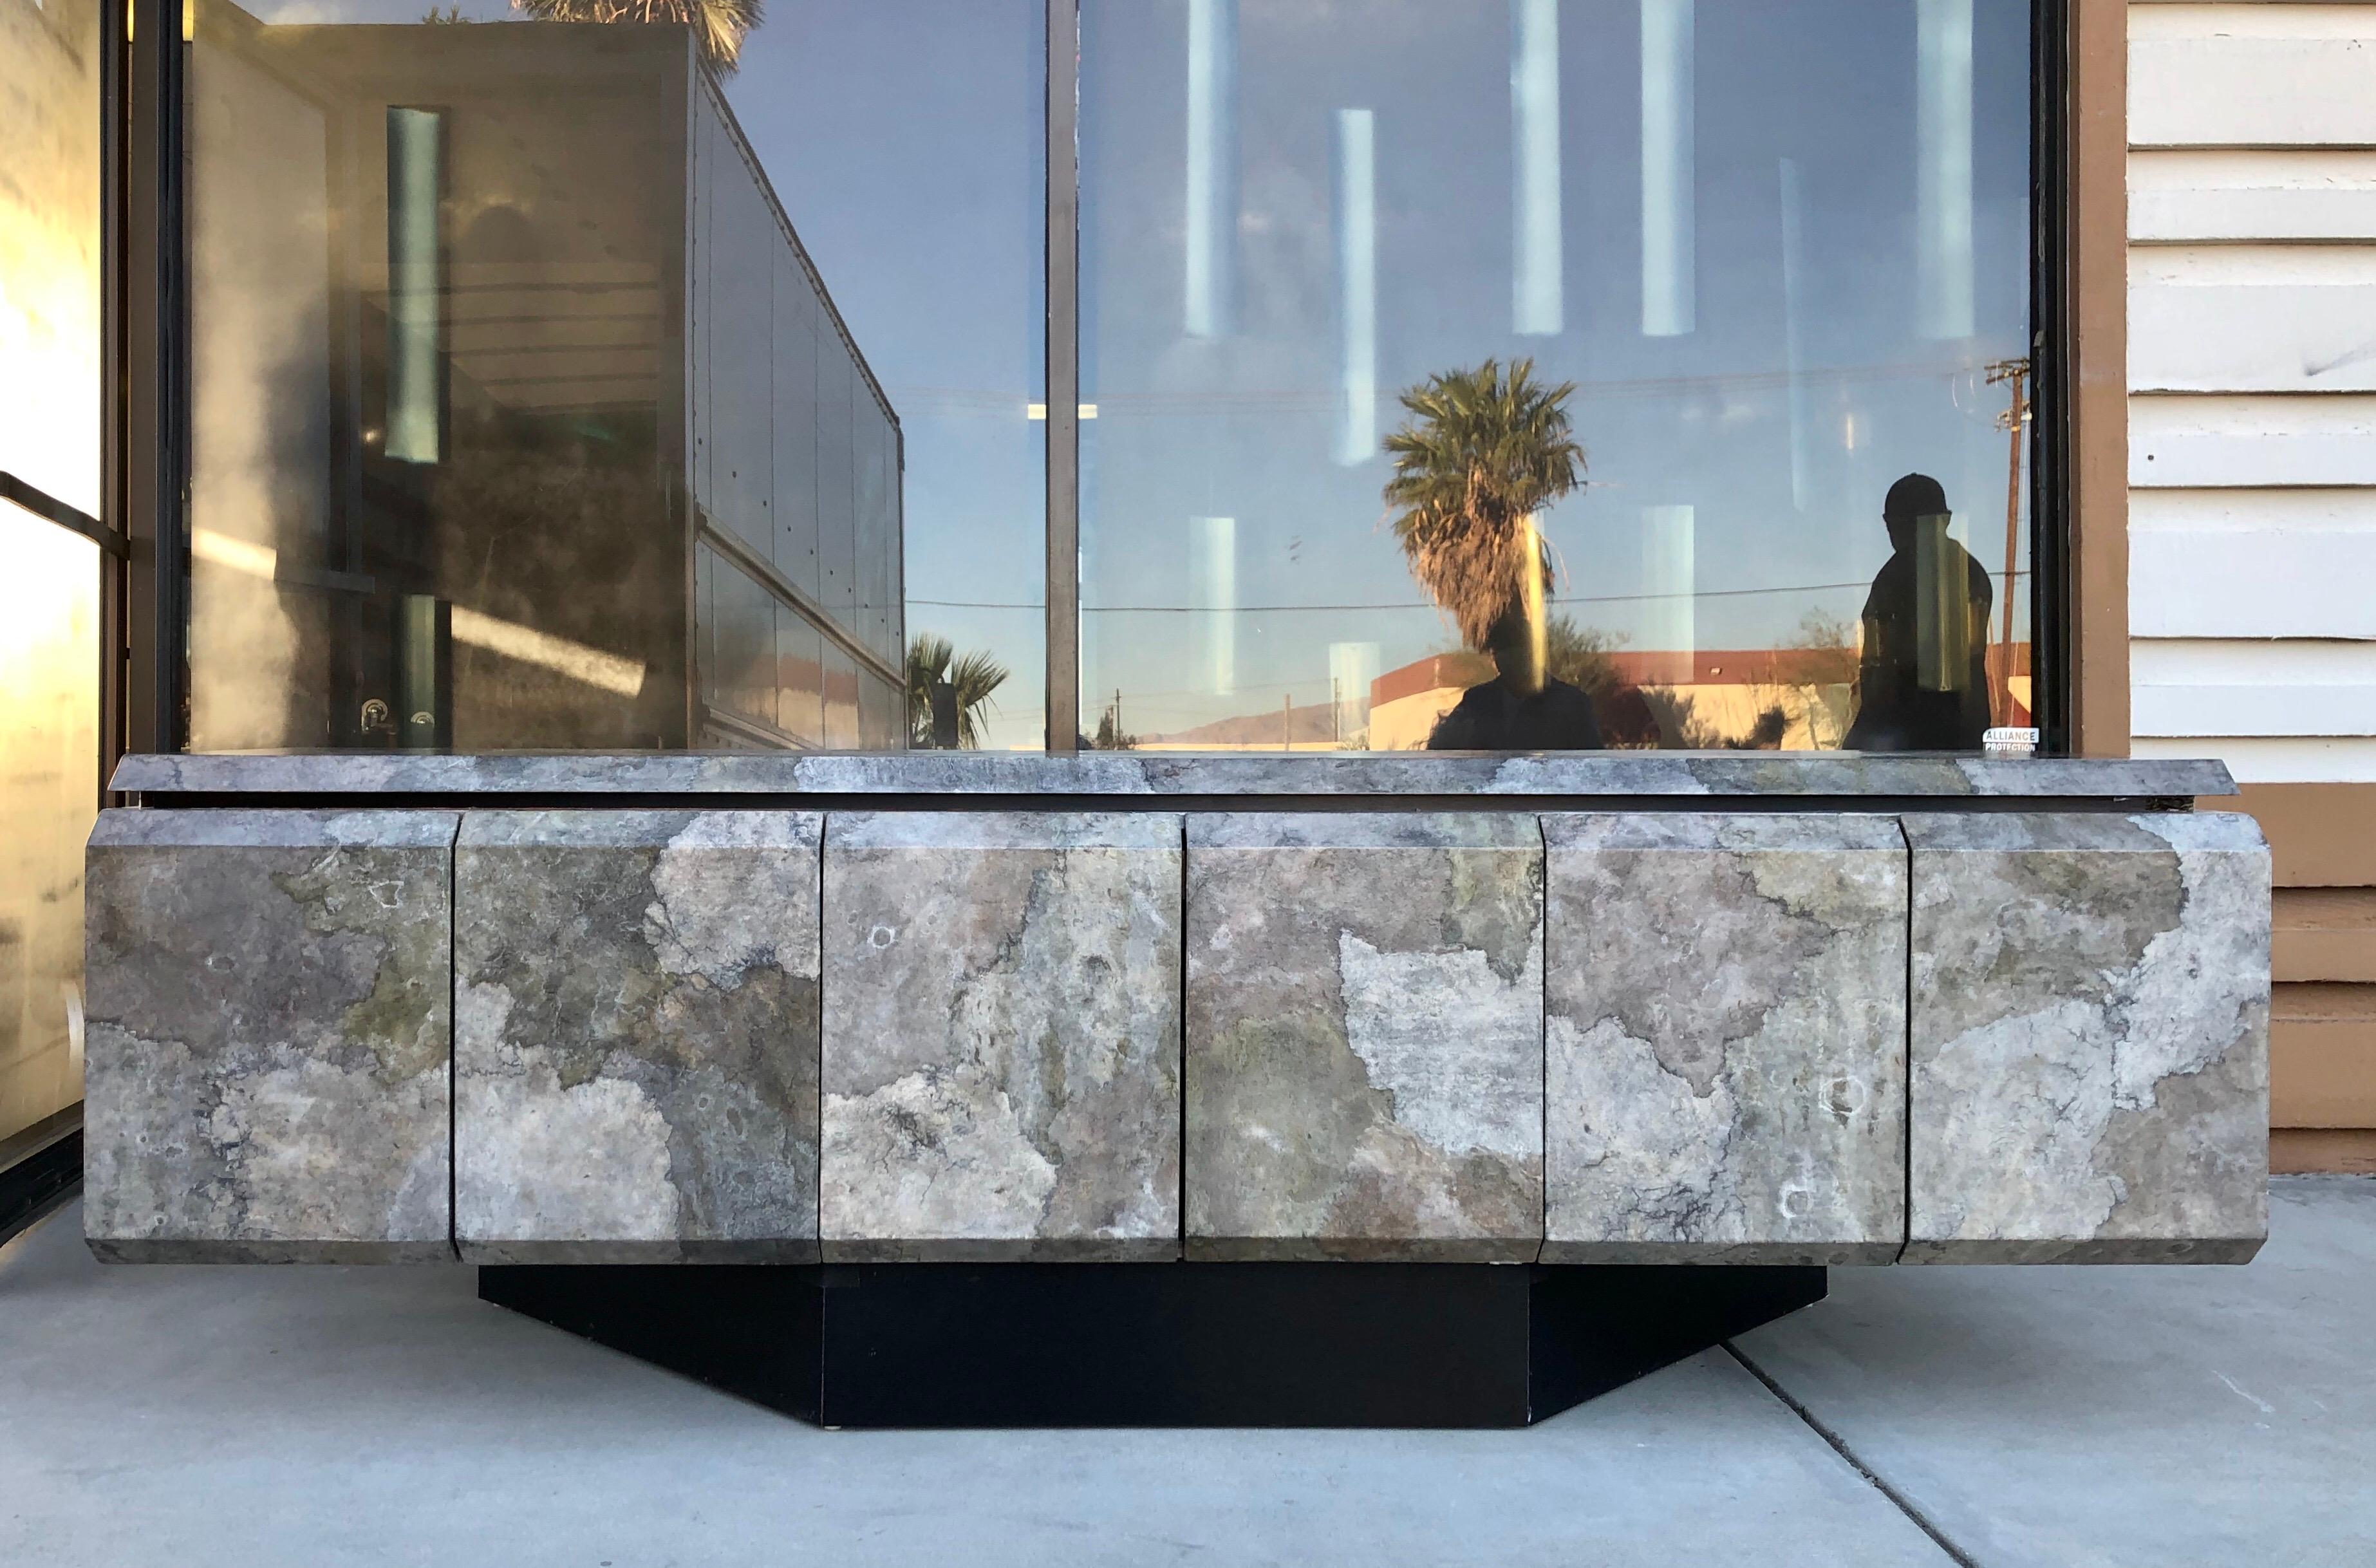 This sideboard is spectacular. It was custom made for a Palm Springs estate and is done with a faux goatskin finish that is extremely dimensional and beautiful. Colorations are melange of gray, silver, and greenish undertones metallic. The